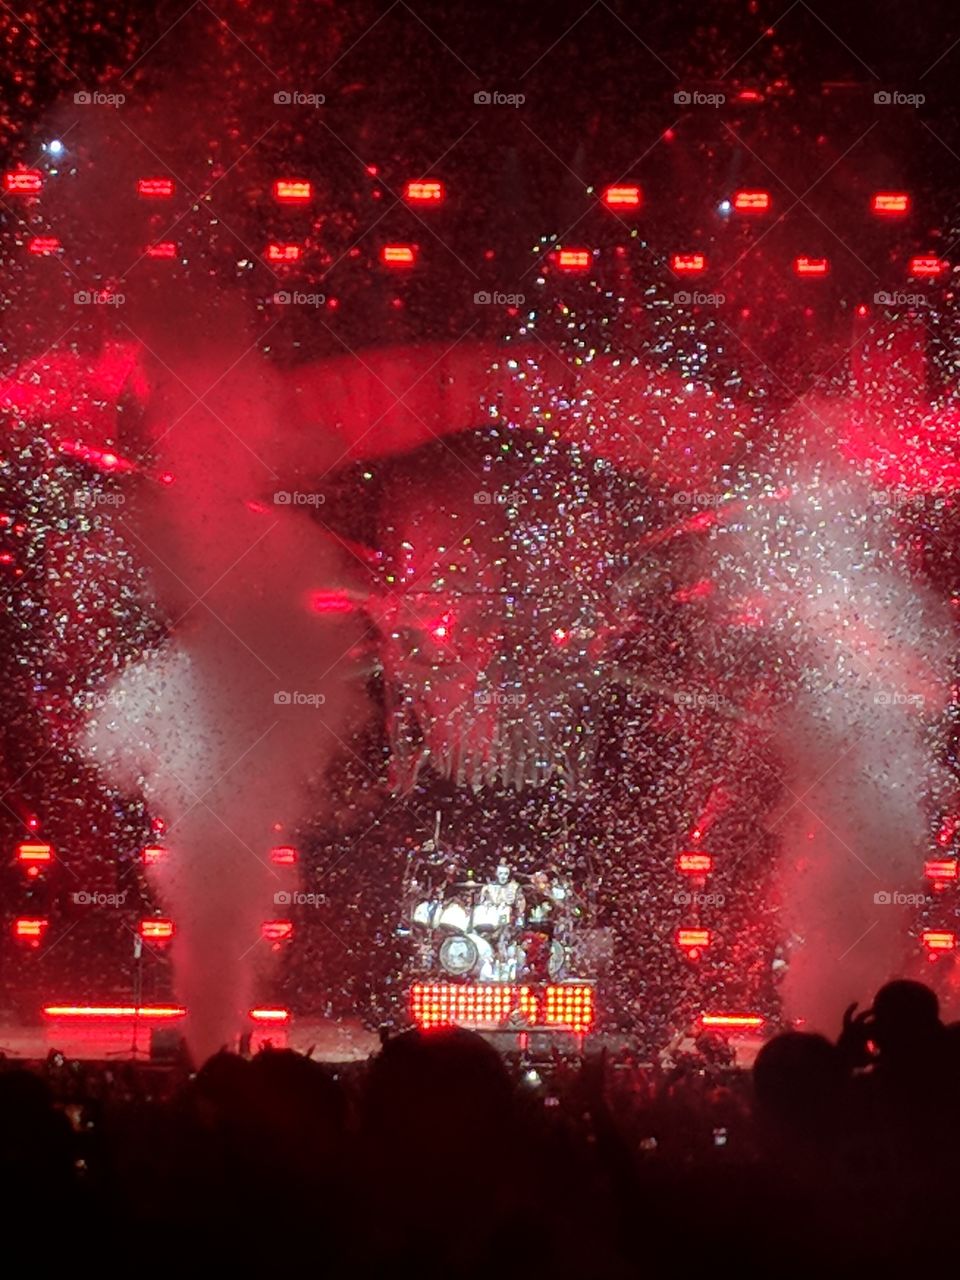 Confetti rains onto the crowd and lead singer is Ivan Moody from Five Finger Death Punch at the Aug 11, 2018 in Tampa FL